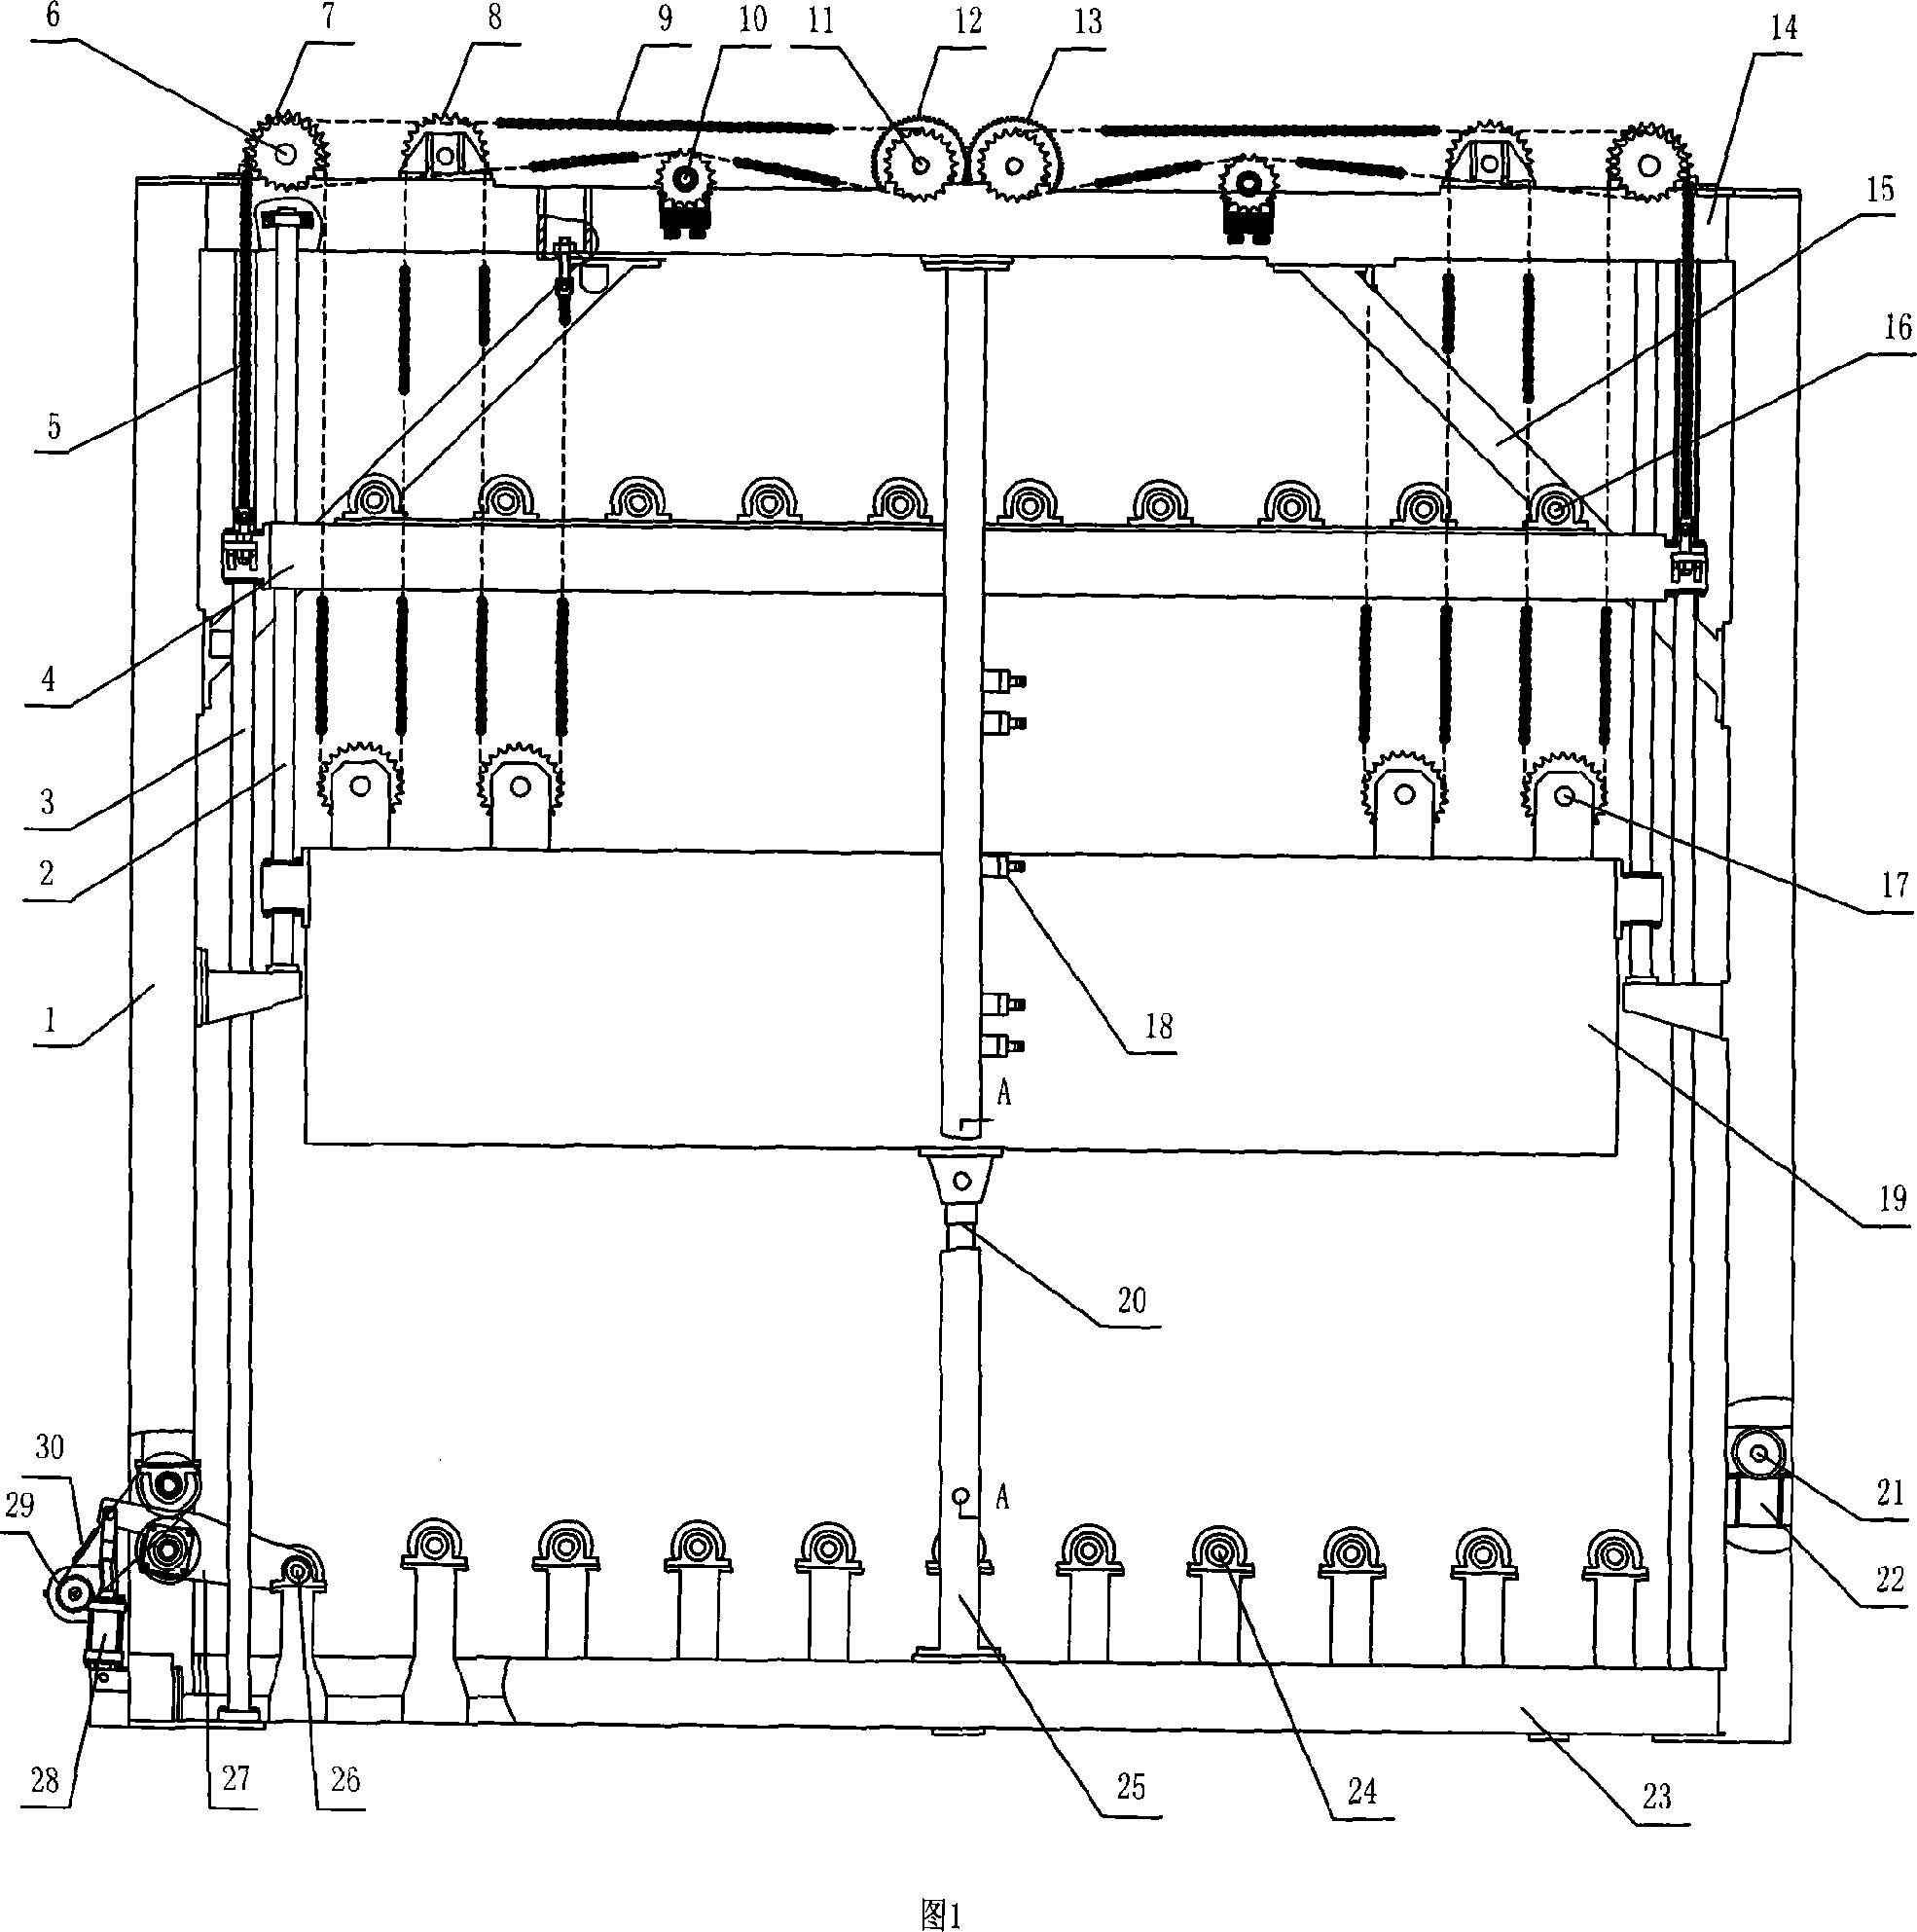 Roll material dynamic storing apparatus with tension control